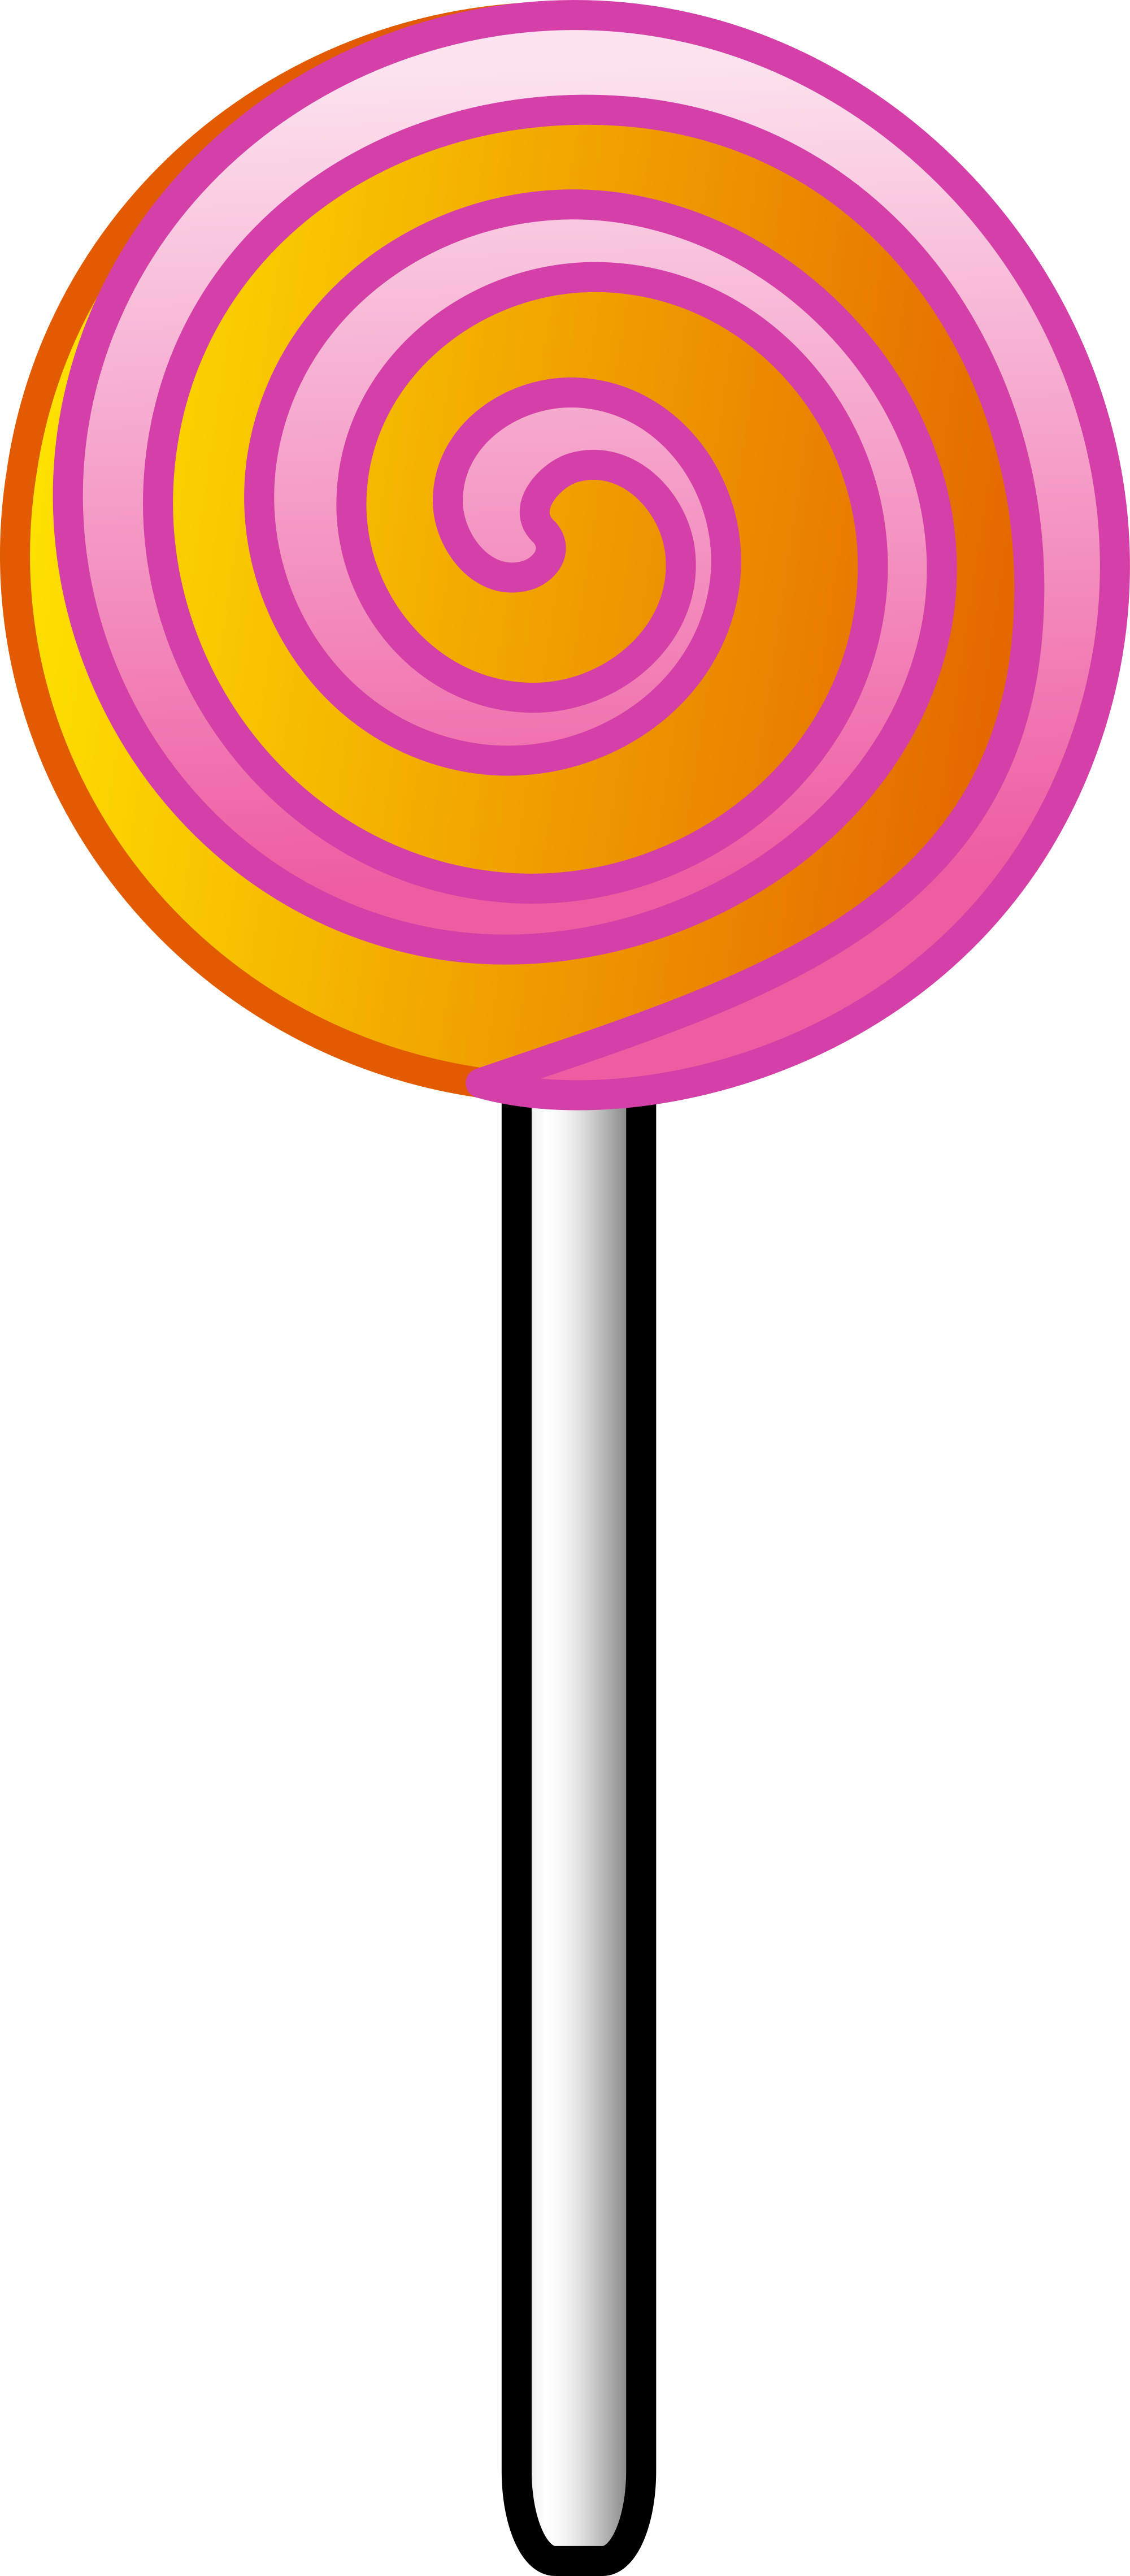 Lollipop Clipart to Download - dbclipart.com